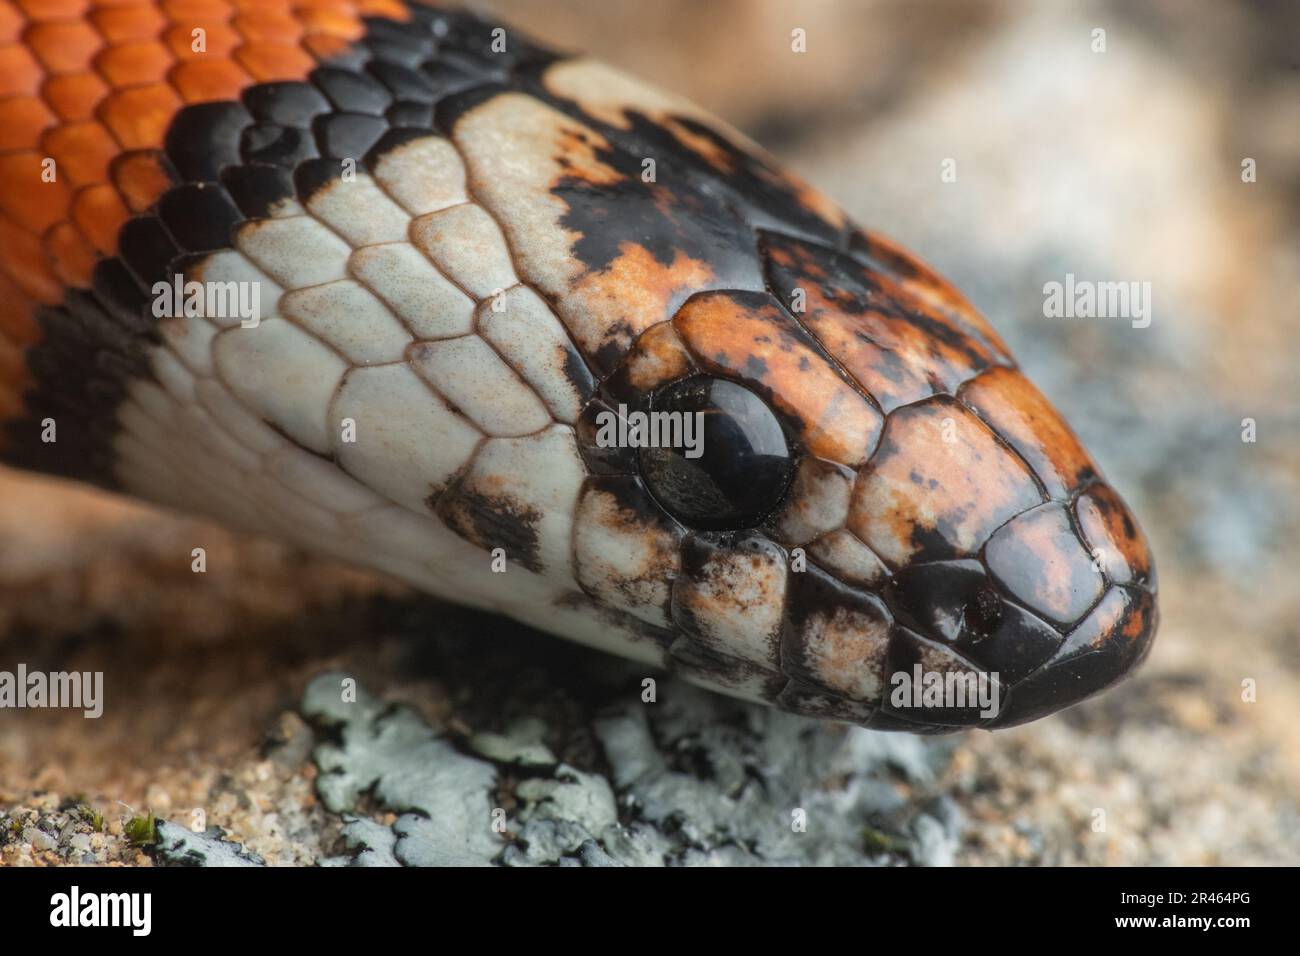 A California mountain kingsnake (Lampropeltis zonata) from the West Coast of North America - a colorful and beautiful harmless snake. Stock Photo